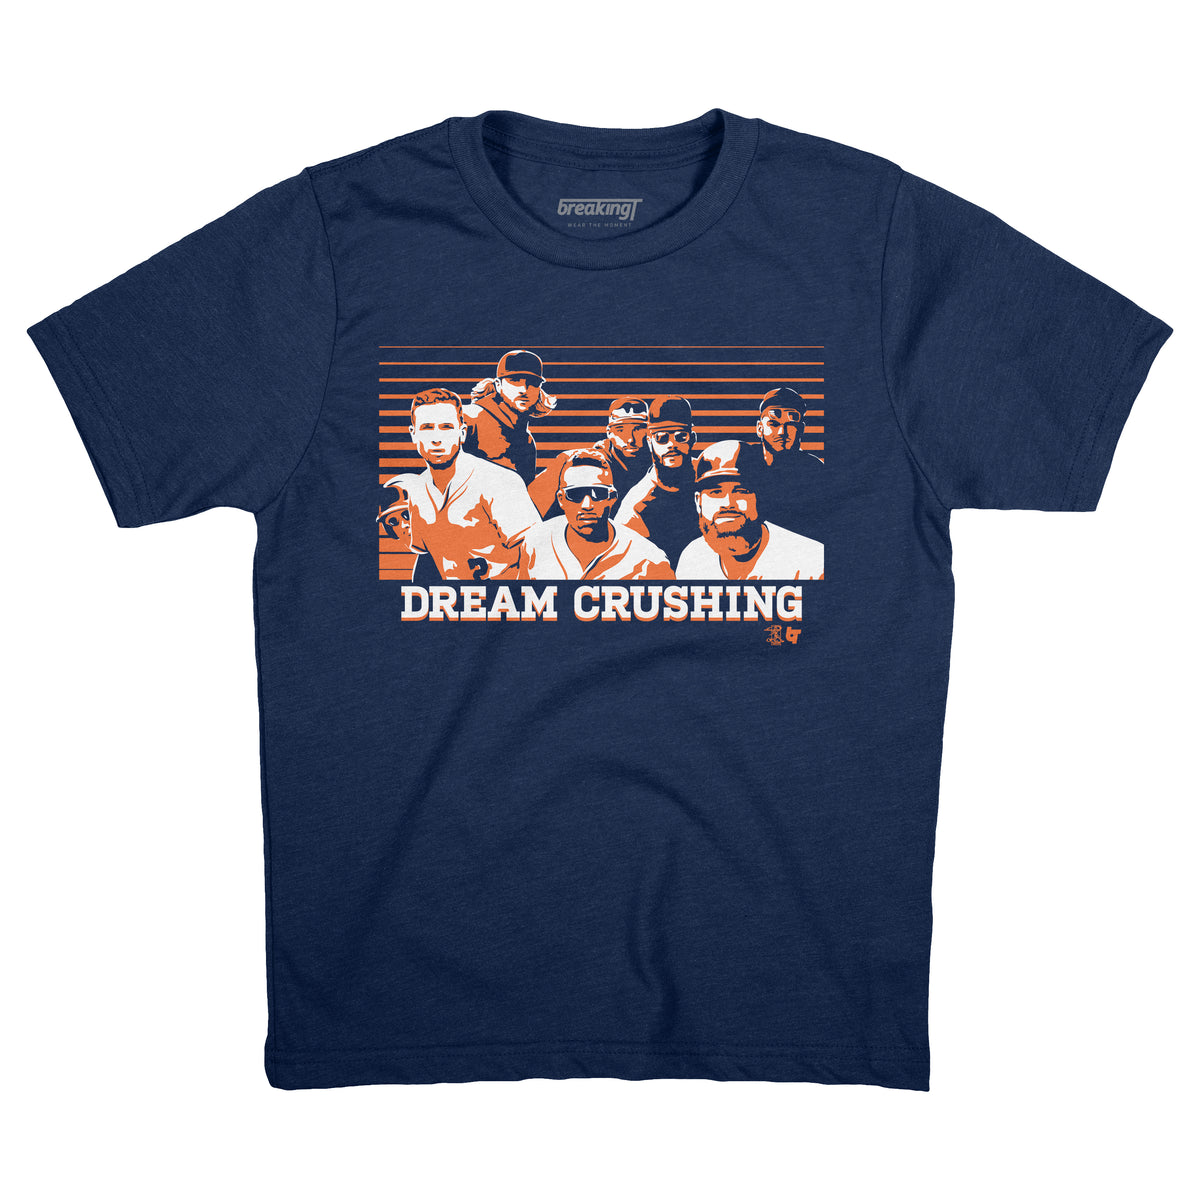 NEW: Lance McCullers Breaking T shirt. NASTY - The Crawfish Boxes